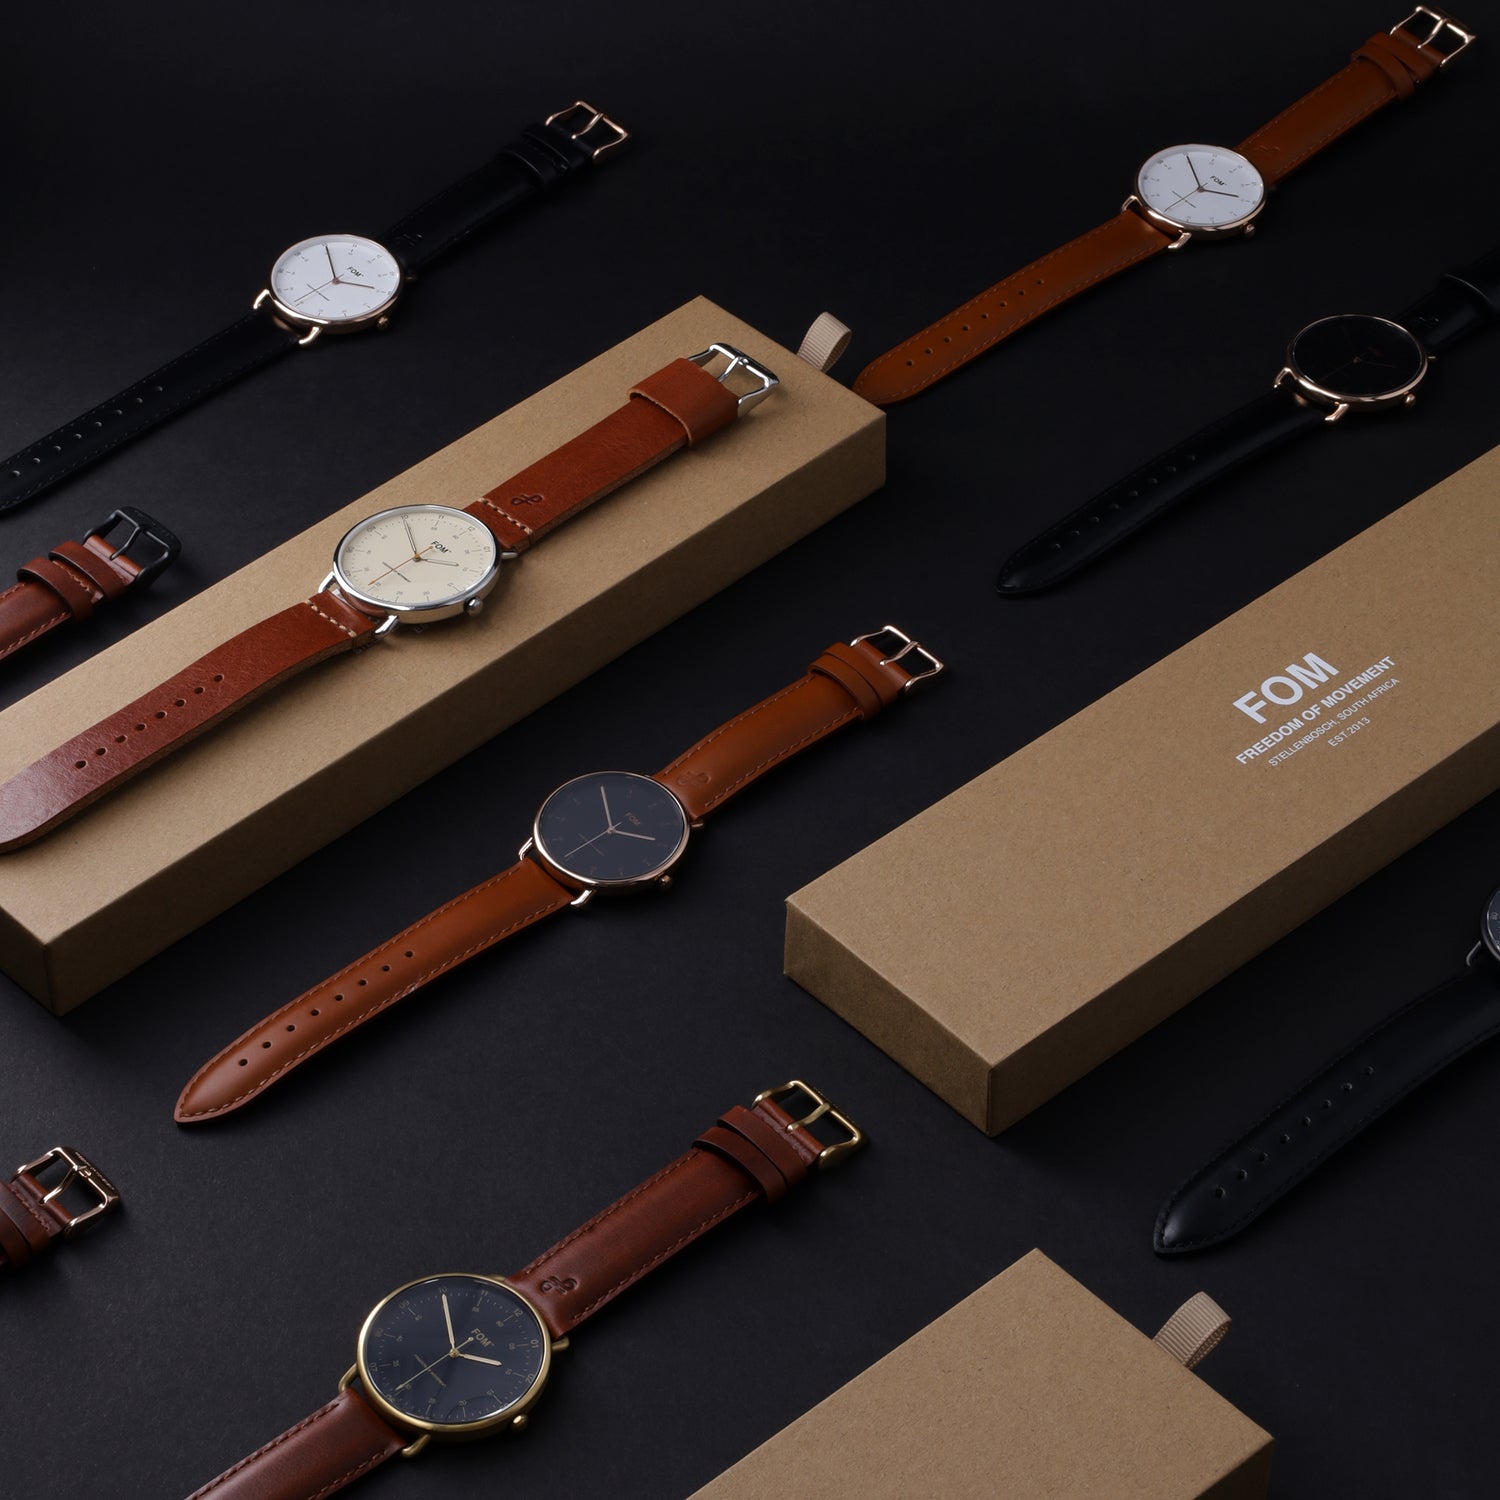 FOM leather strap watch collection styled creative photography